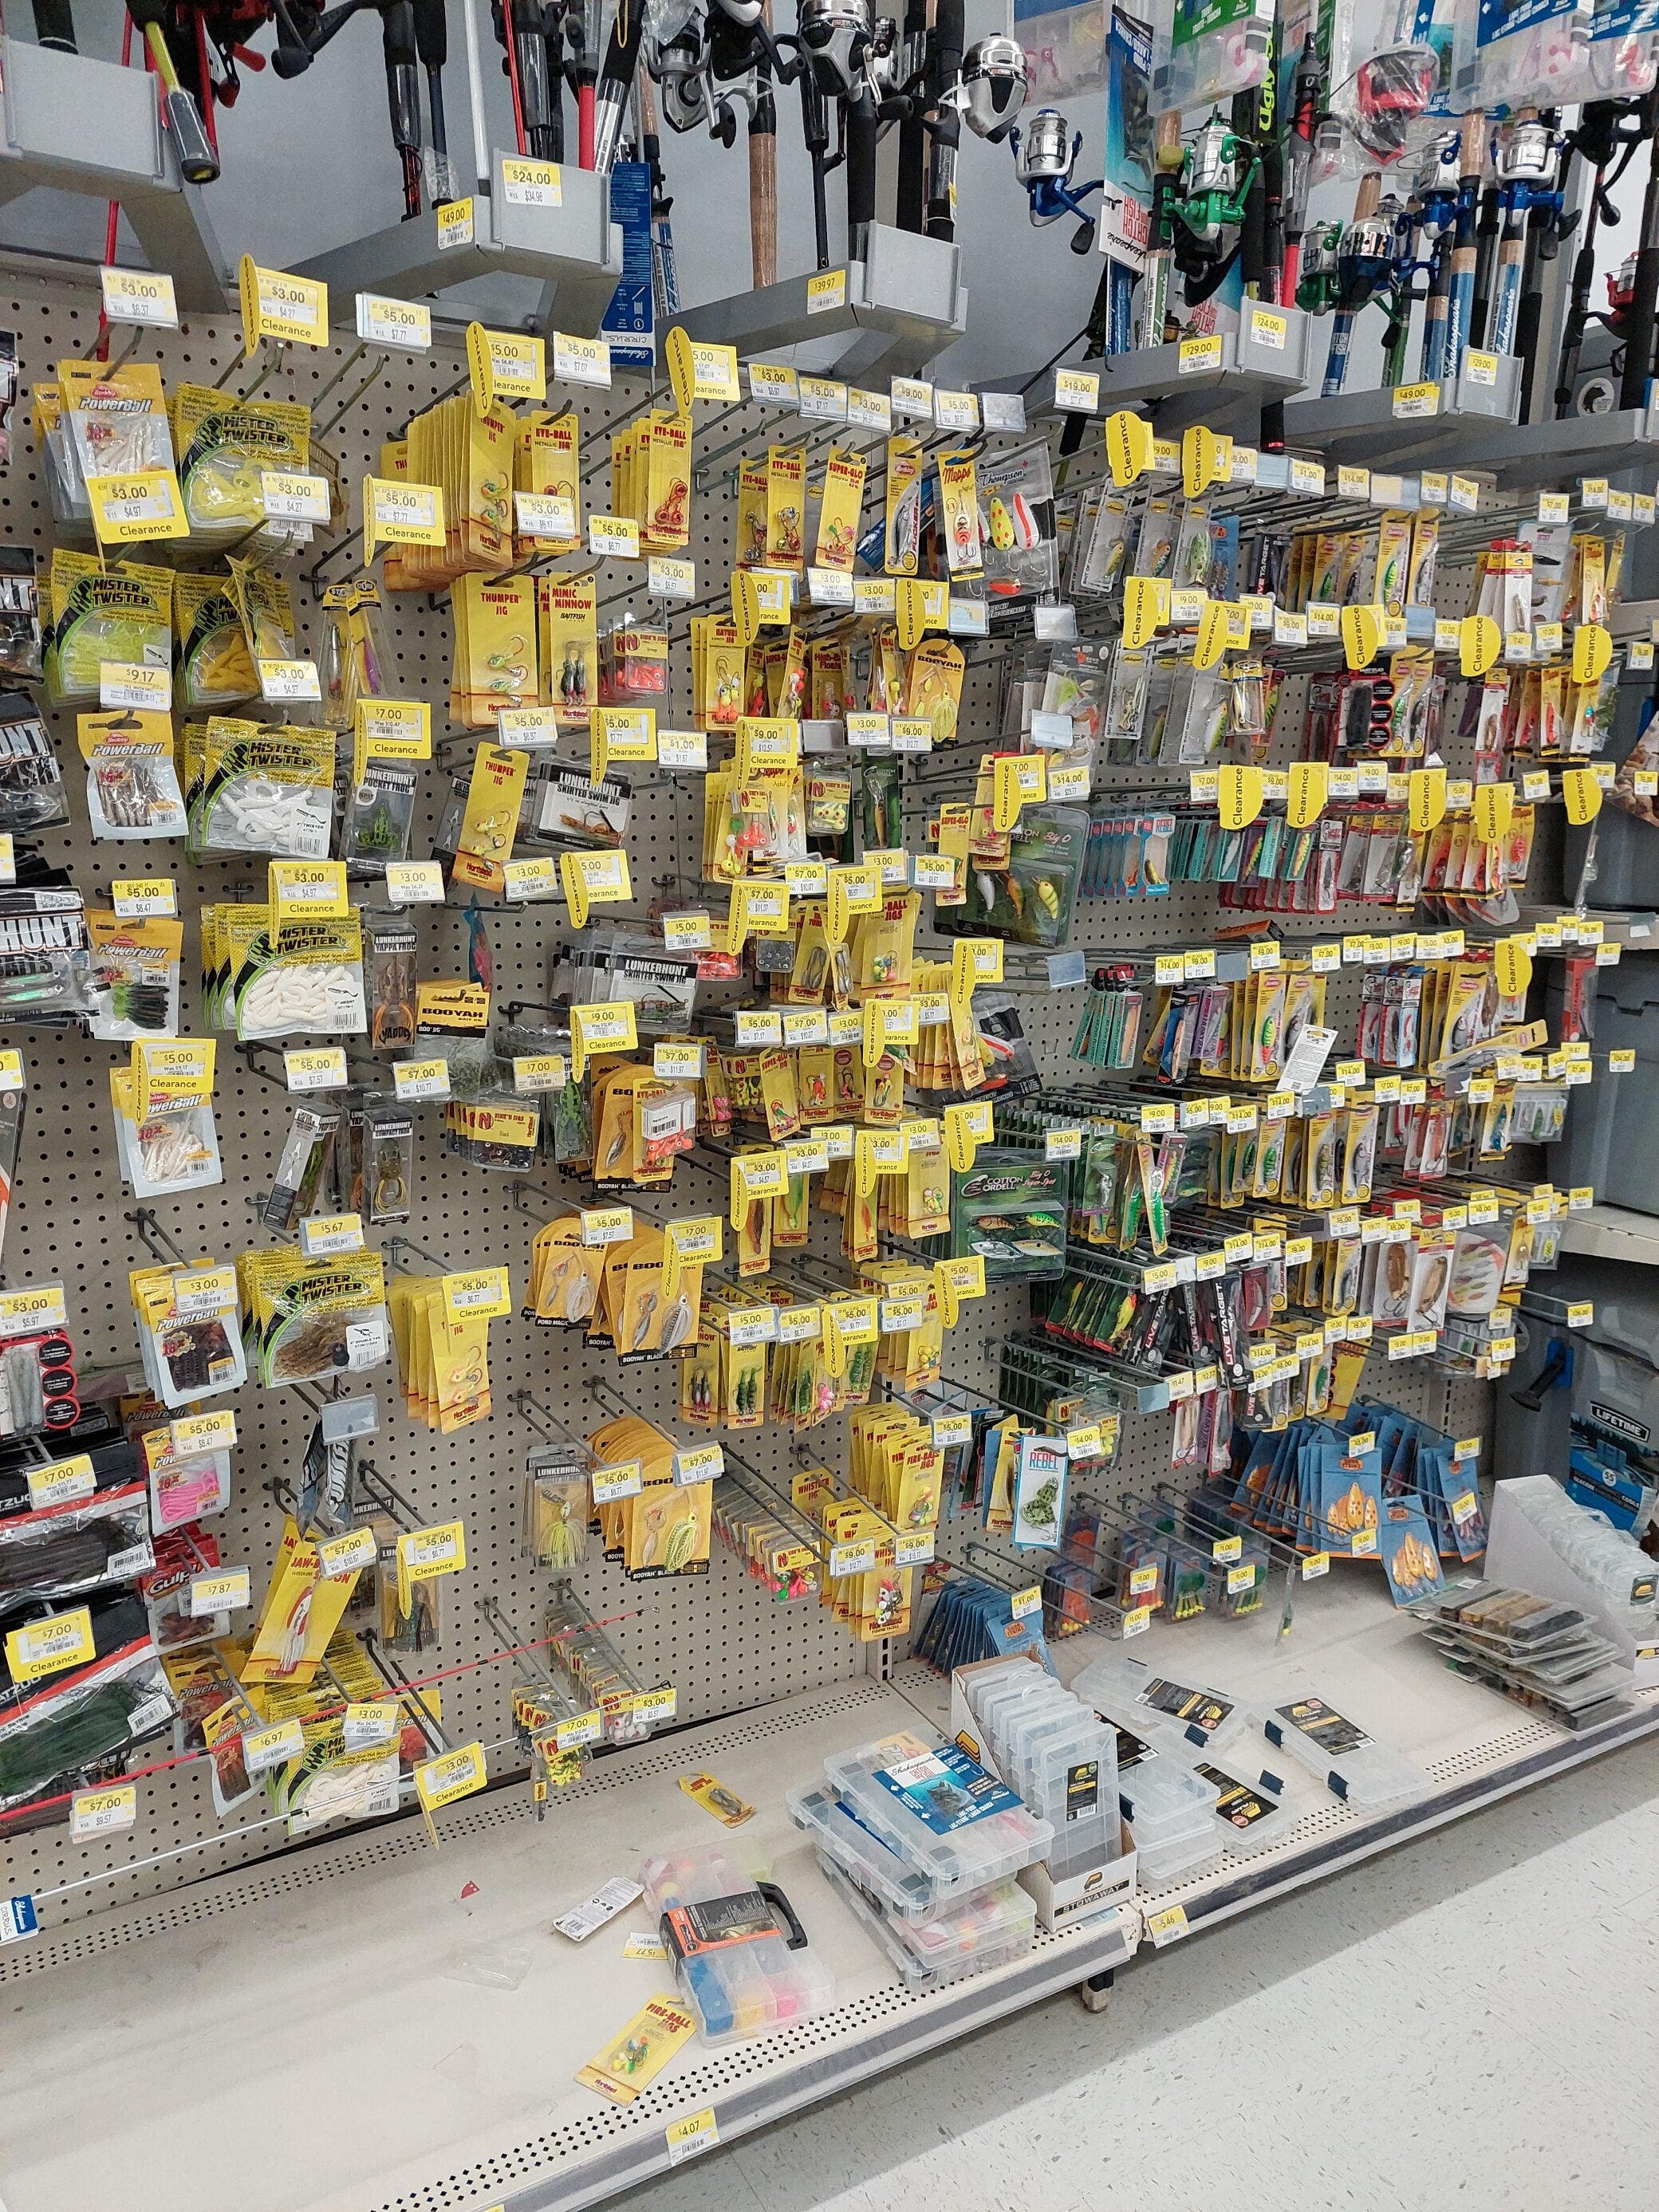 Walmart] Fishing Tackle Clearance - RedFlagDeals.com Forums